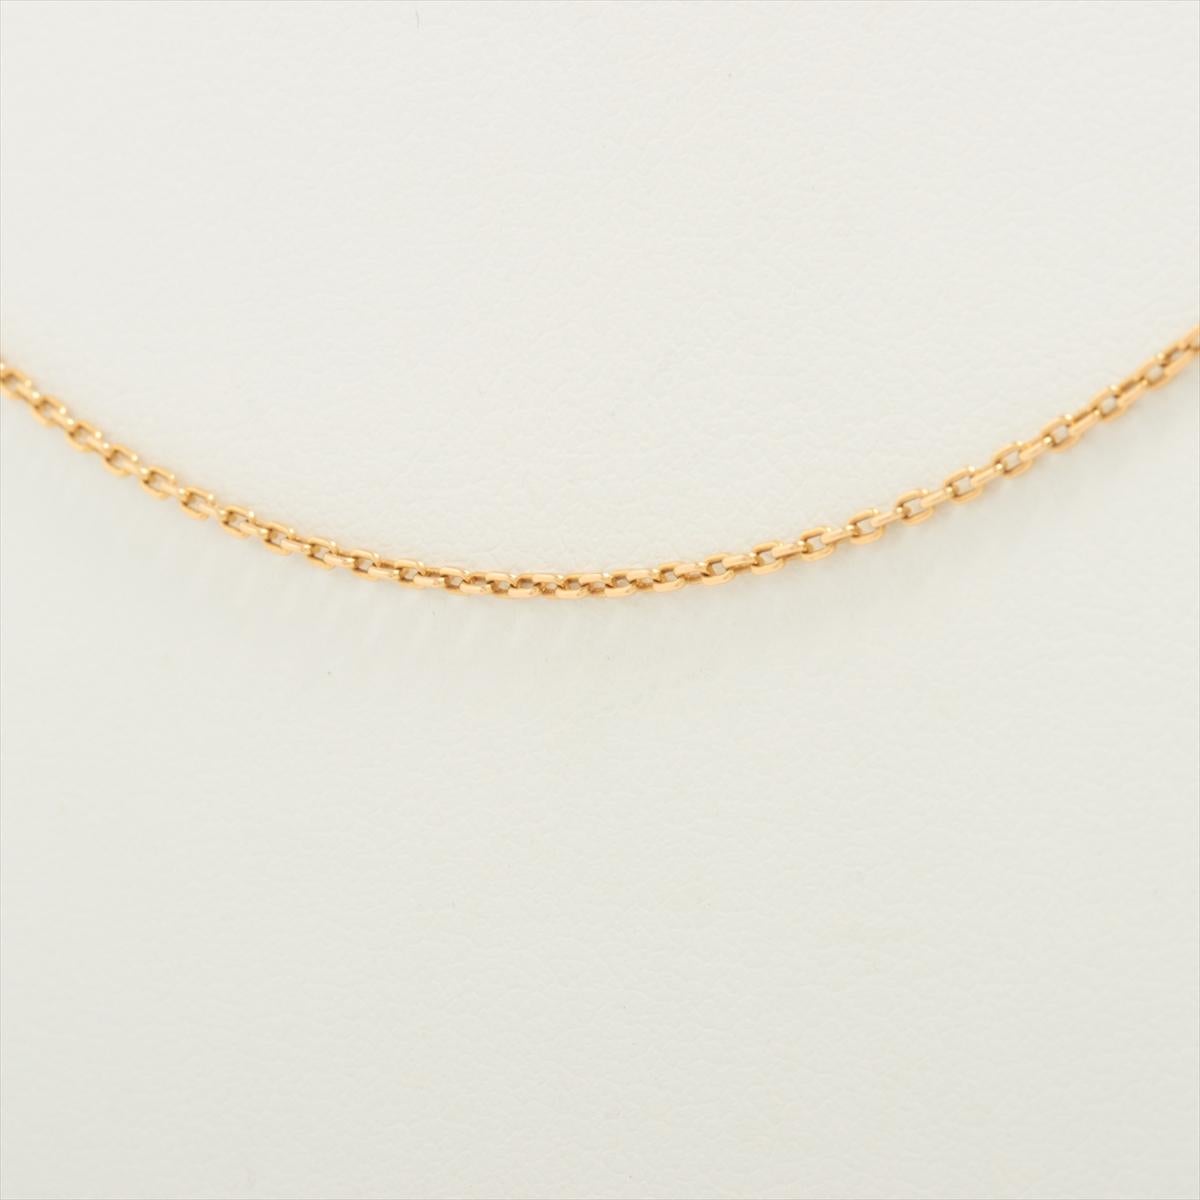 Louis Vuitton Link Chain Necklace Gold In Good Condition For Sale In Indianapolis, IN